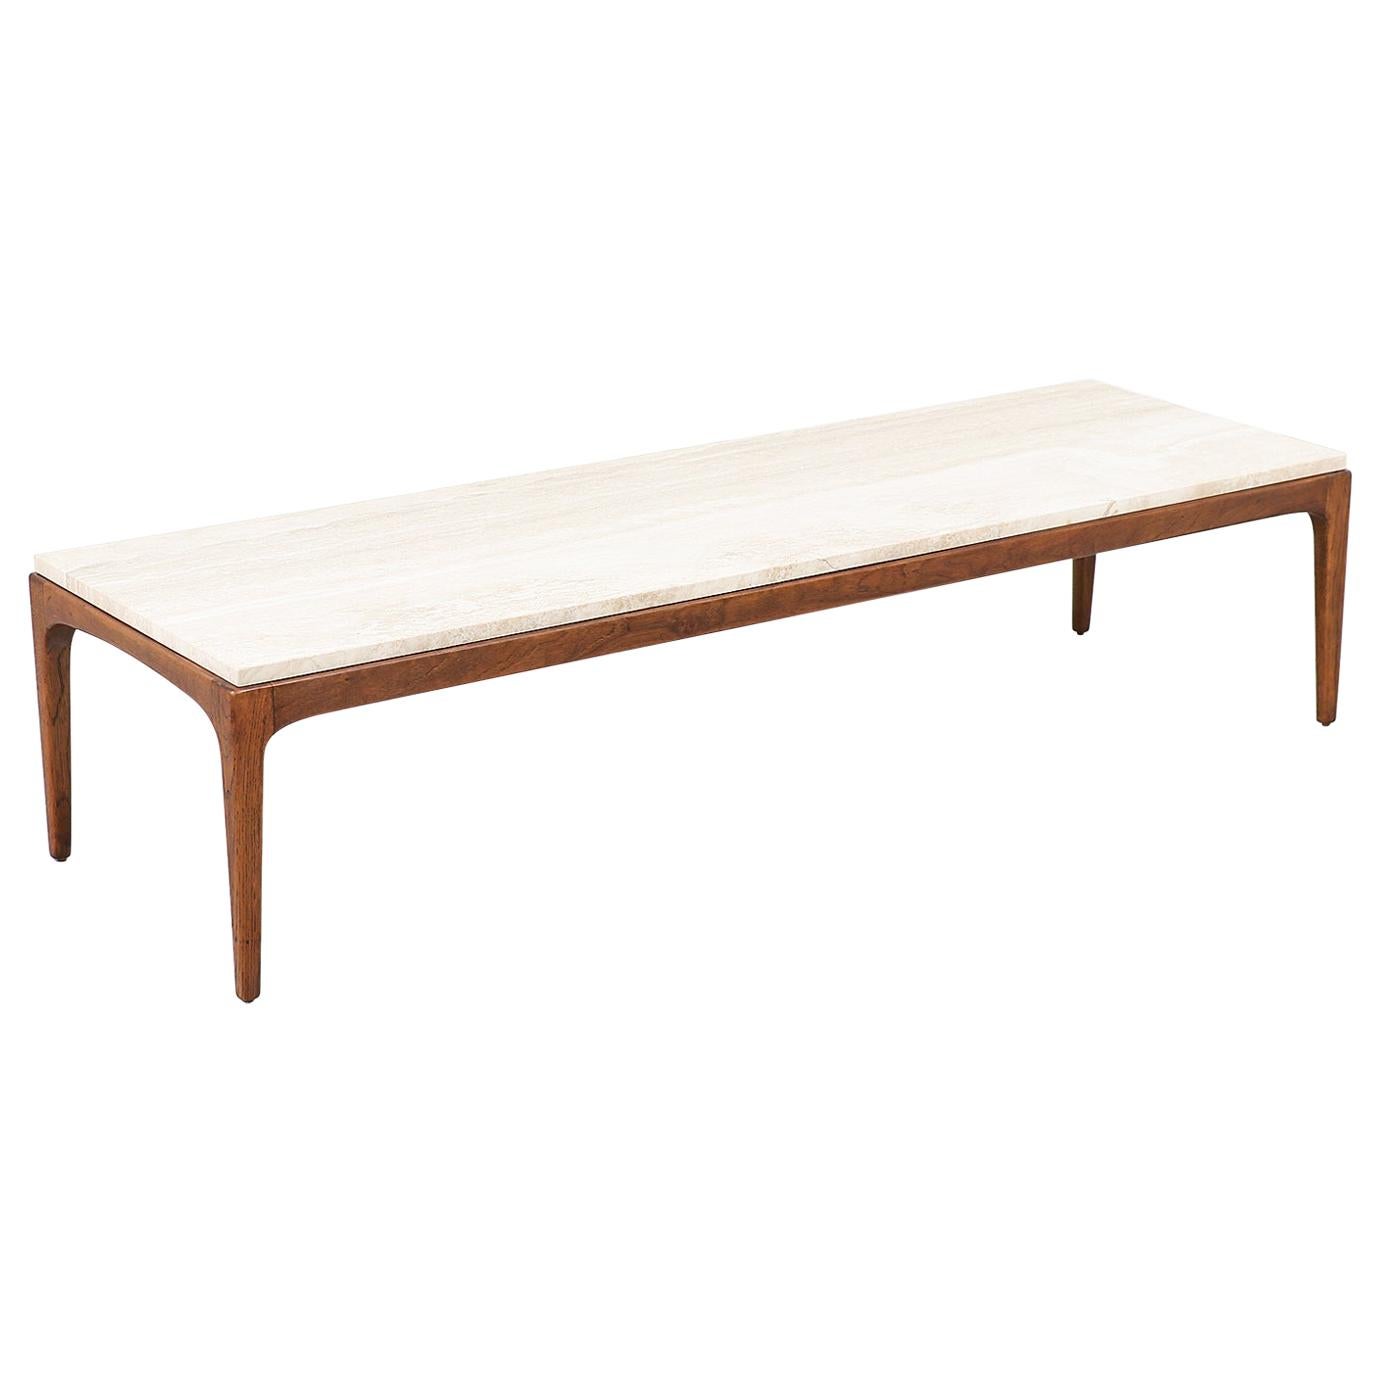 Mid-Century Modern “Rythm” Coffee Table with Crema Marfil Marble Top by Lane